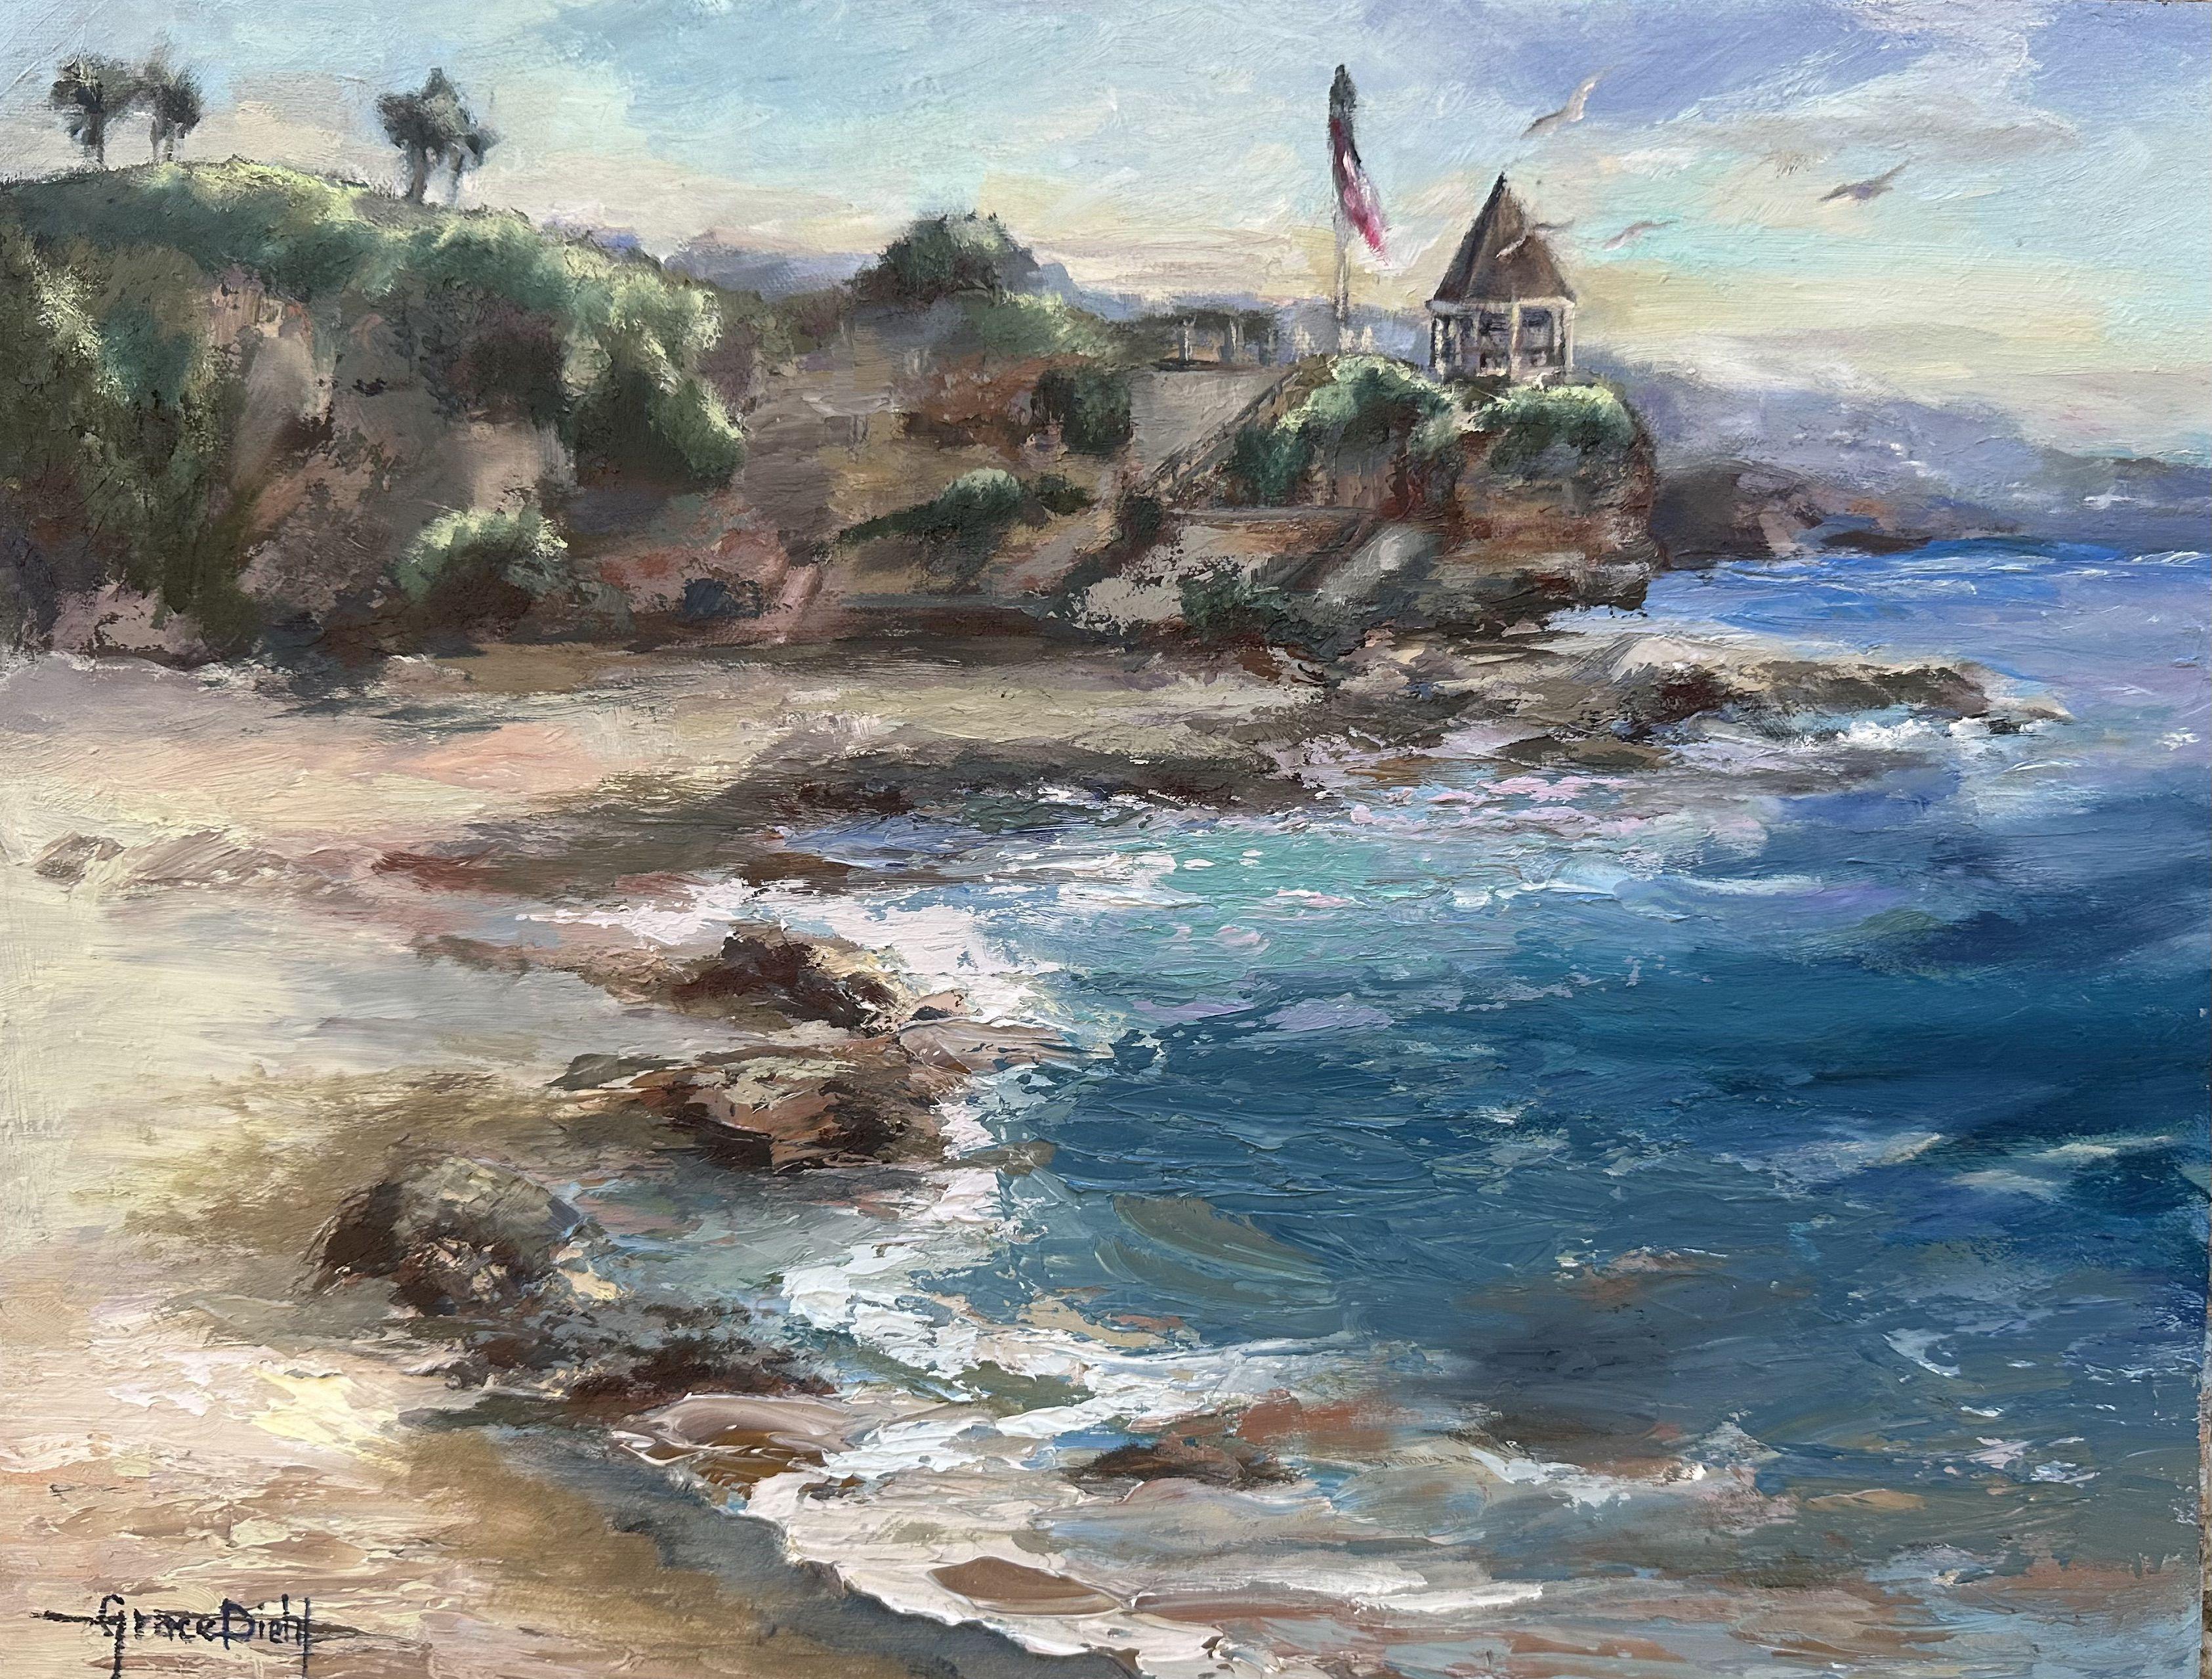 The beach at Shawâ€™s Cove is where I did this painting, en plein aire. Shaw's Cove is situated on the beach in Laguna Beach, CA. It is a small sandy beach that is popular among locals. Scuba divers and snorkelers frequently visit Shaw's Cove, and